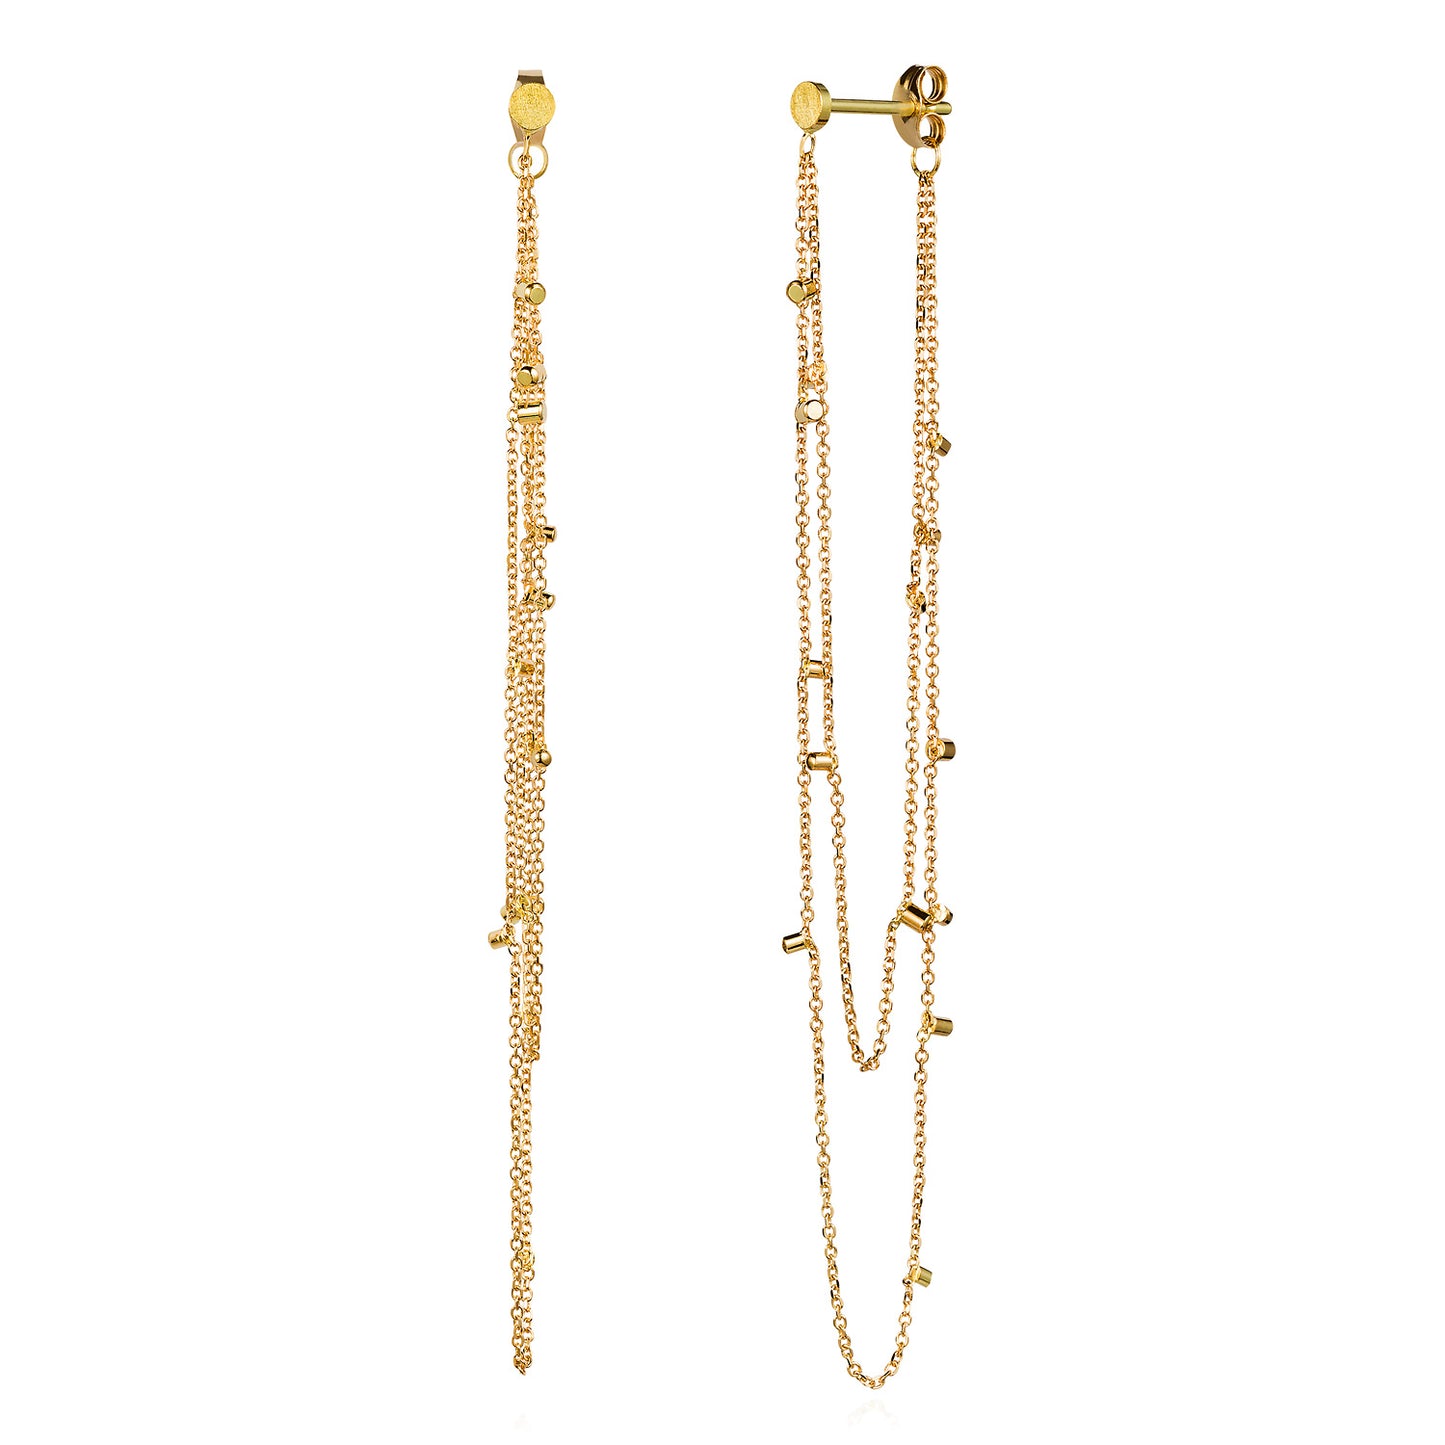 18CT YELLOW GOLD SMALL STUDS WITH 2 STRANDS OF LOOPED CHAIN WITH GOLD DUST SPECKLES